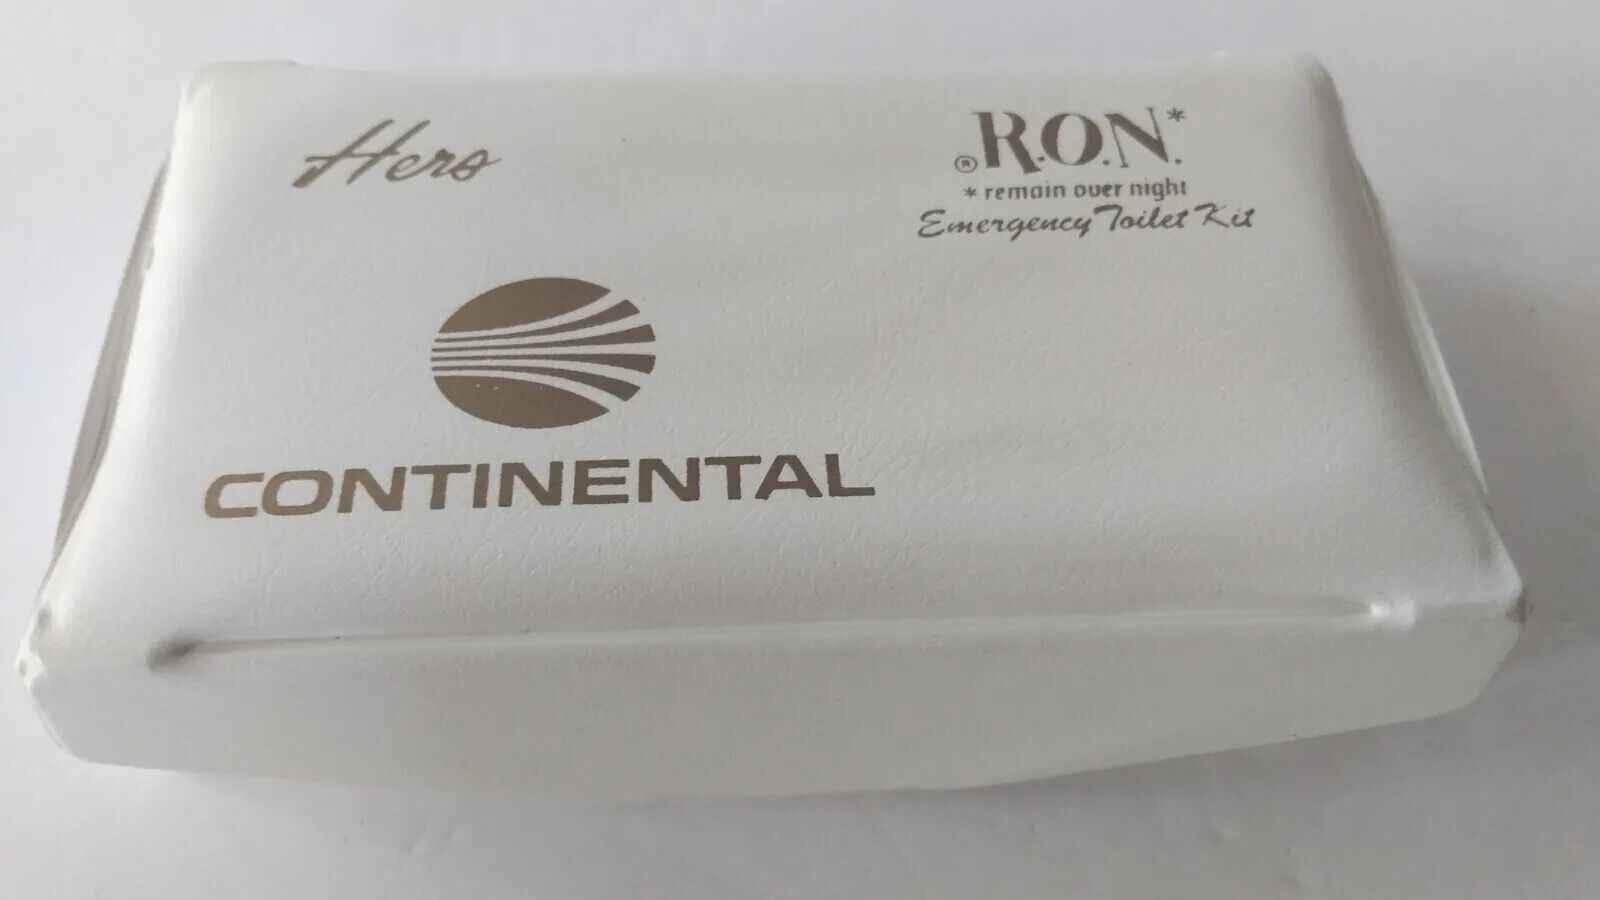 Continental Airlines Amenity Vinyl Kit 1970s Toiletry ER HERS Remain Over Night